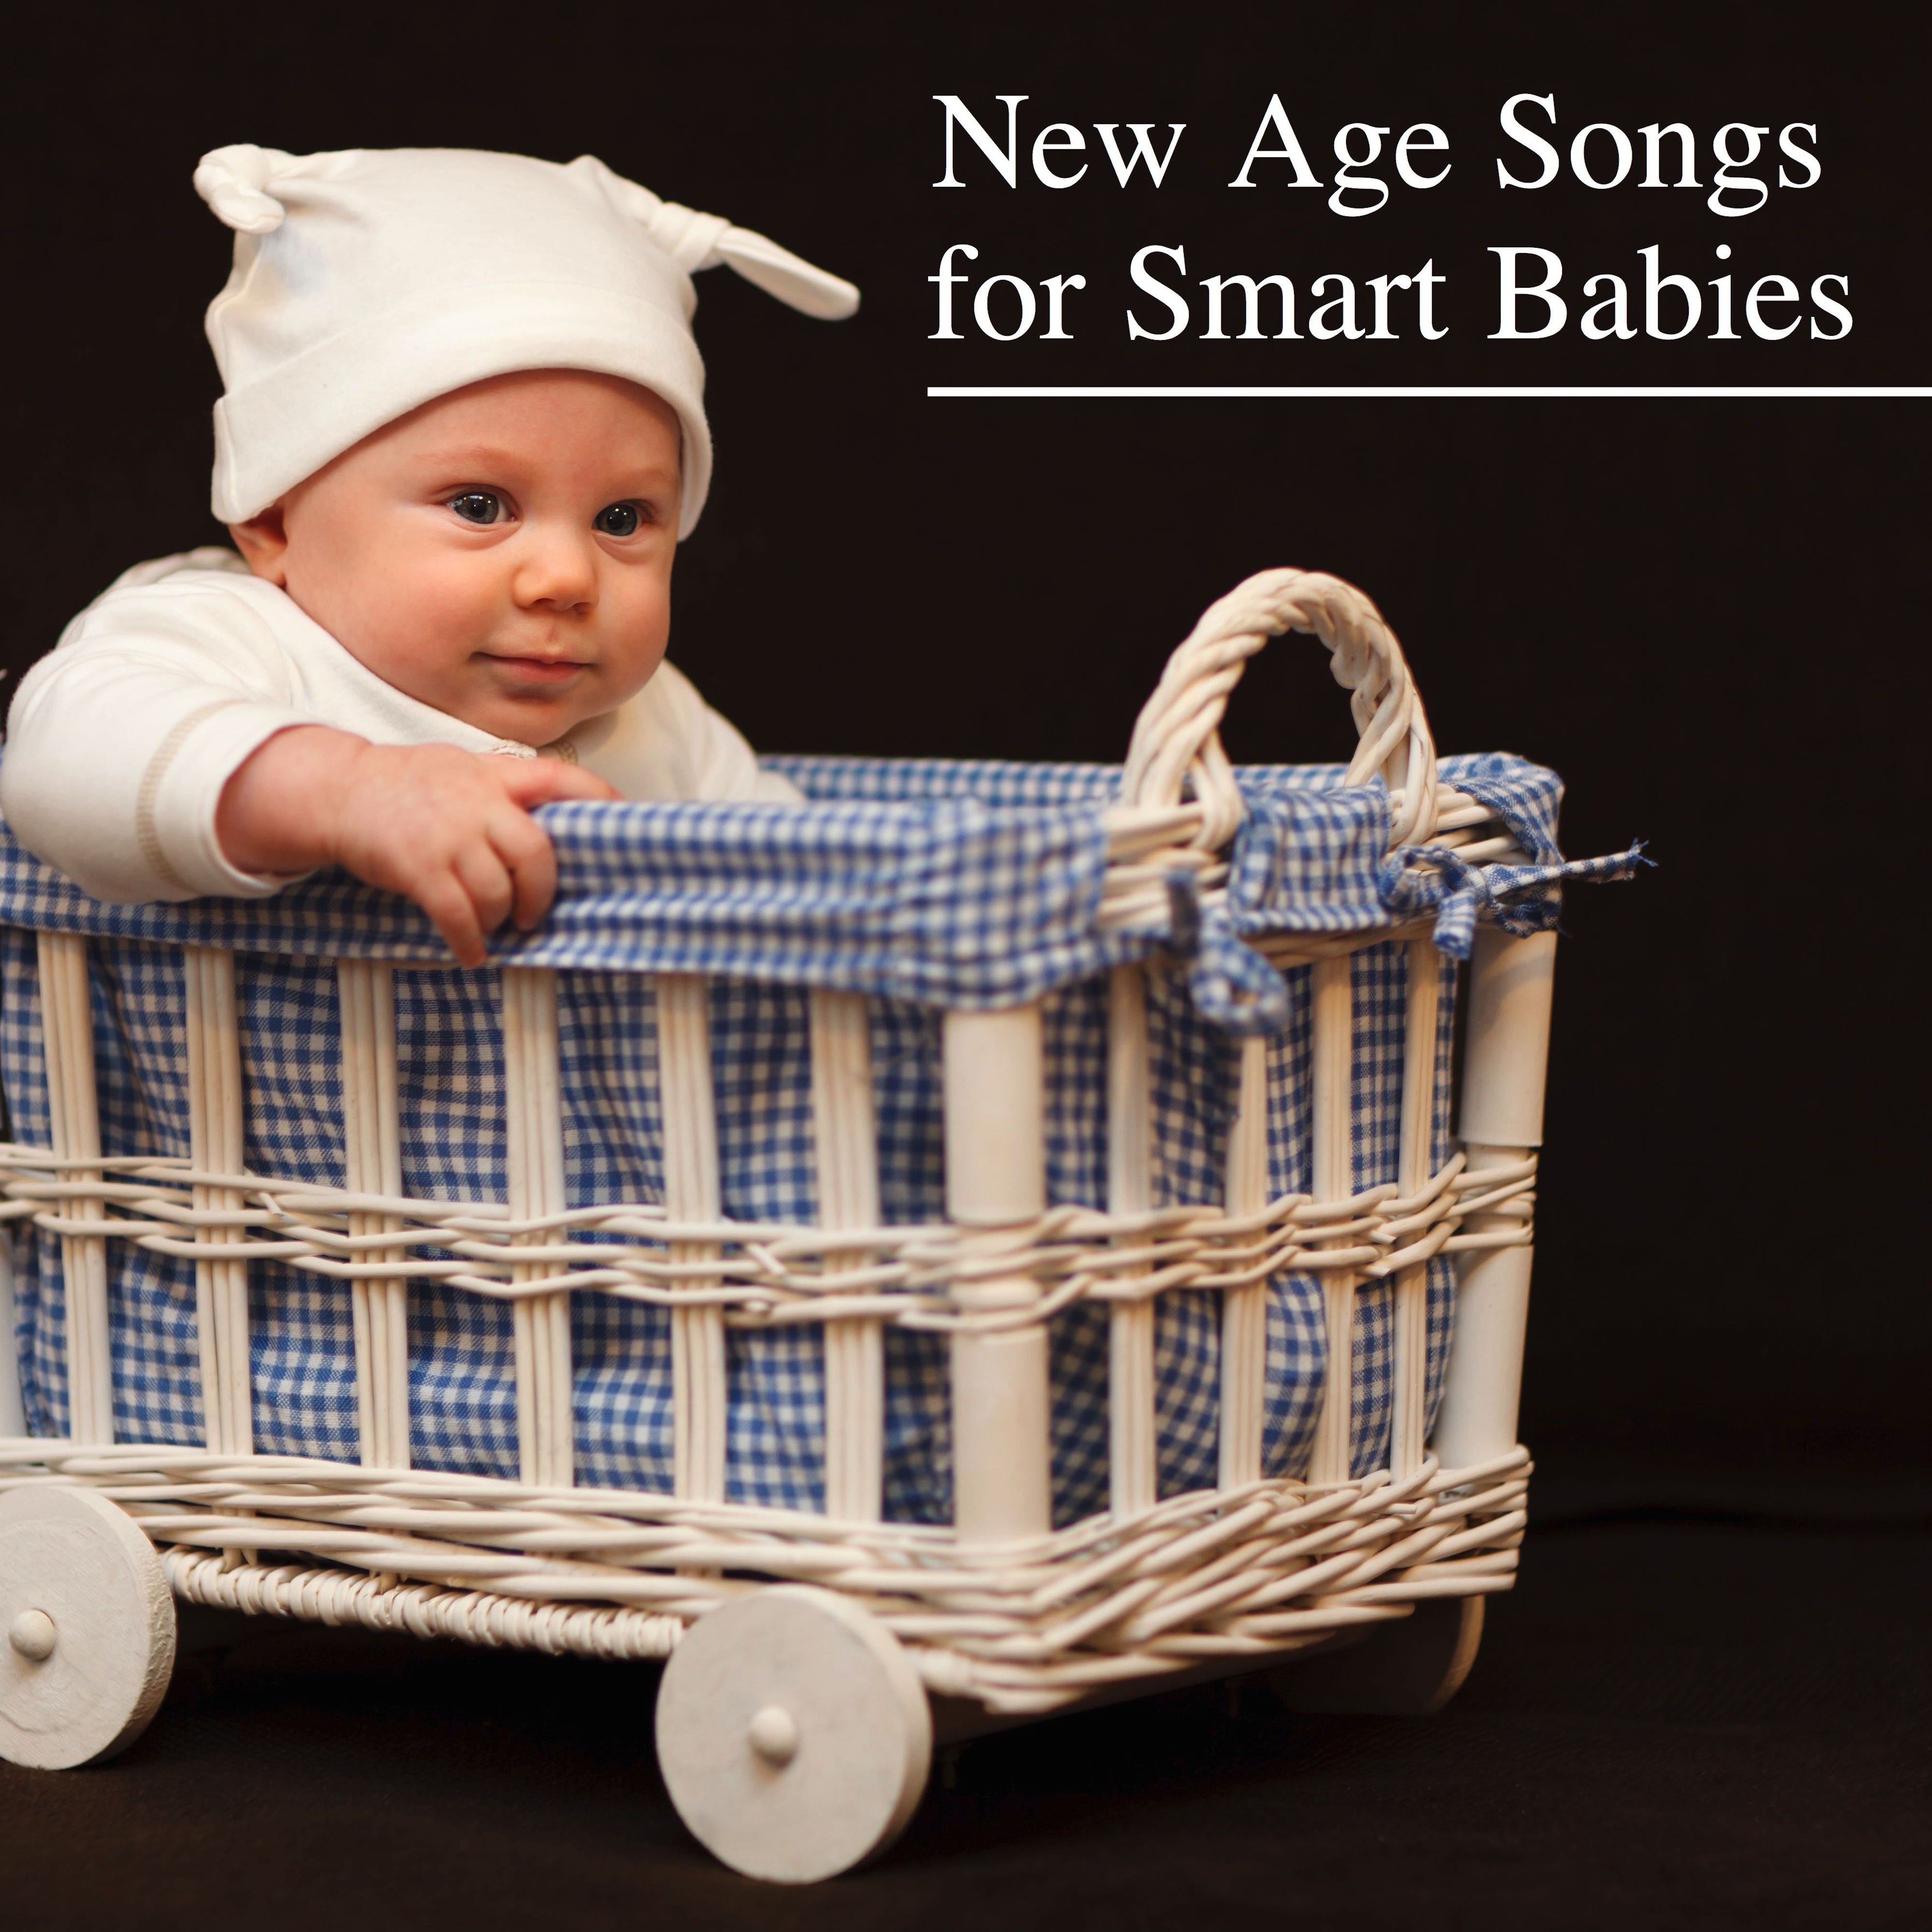 New Age Songs for Smart Babies